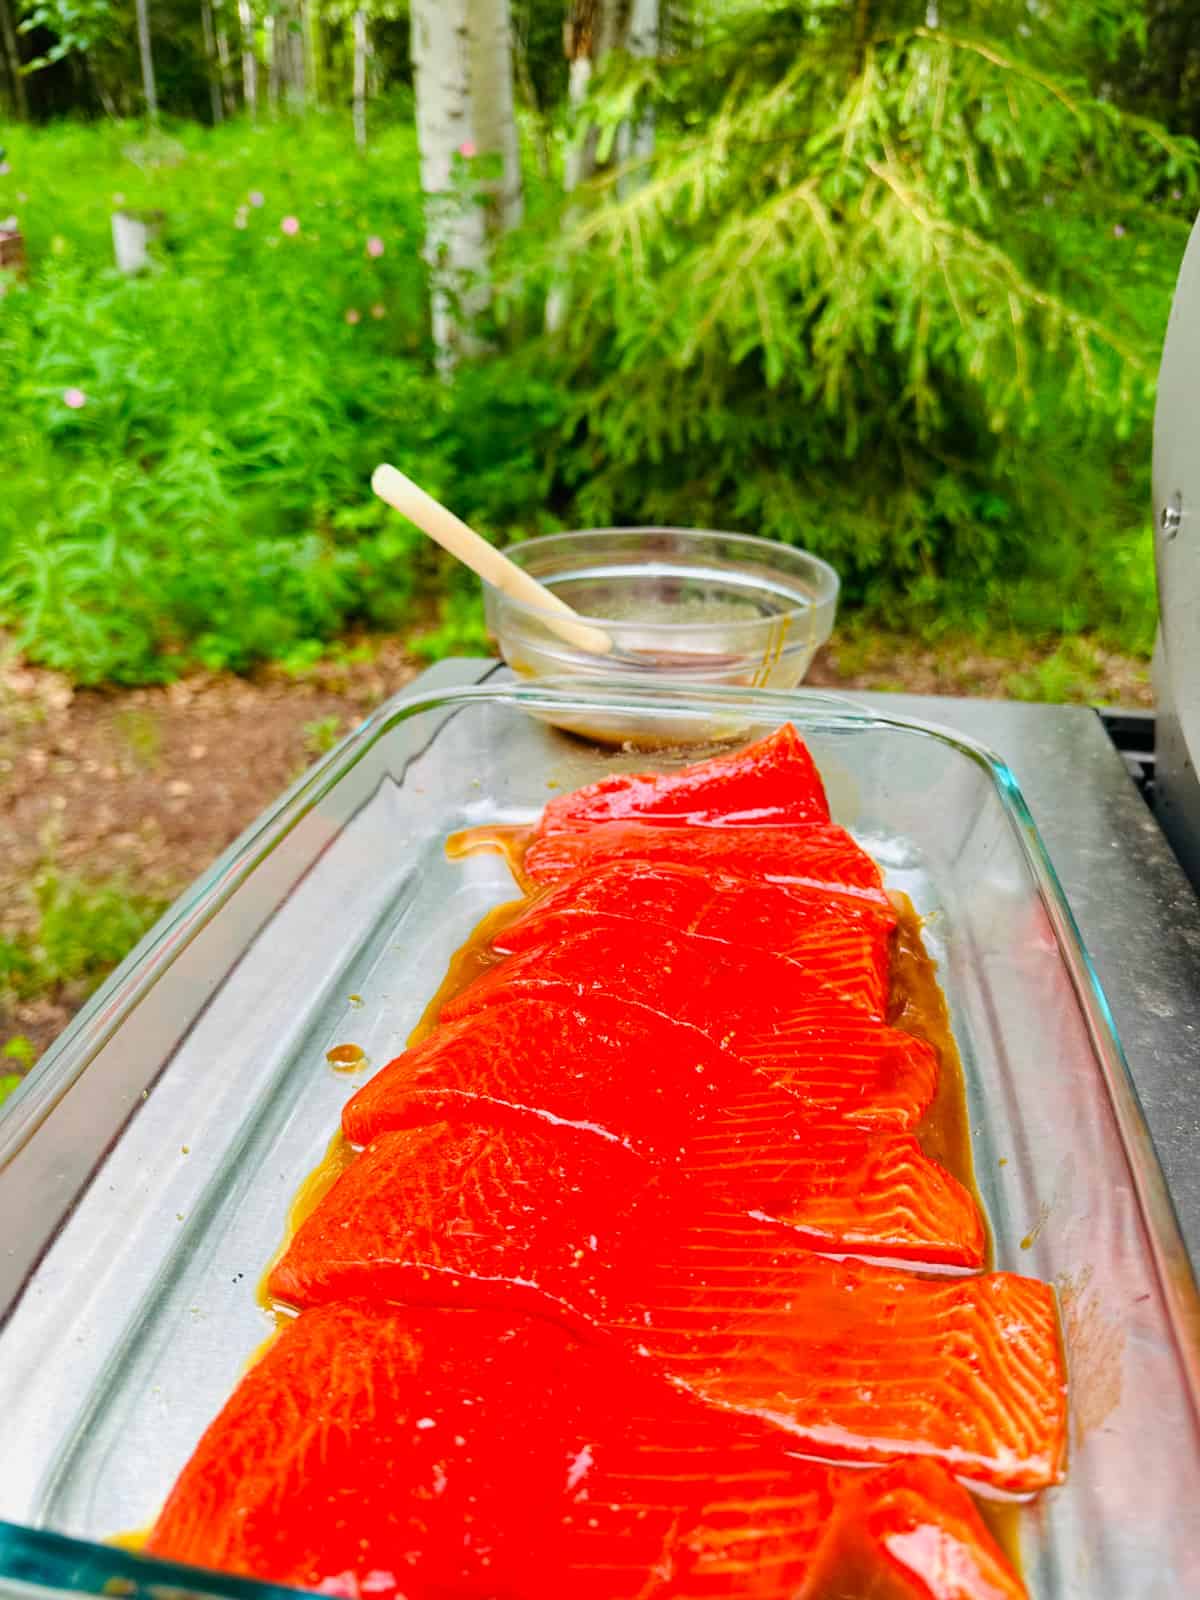 Raw salmon pieces in a glass dish in front of a glass bowl of marinade with a brush.